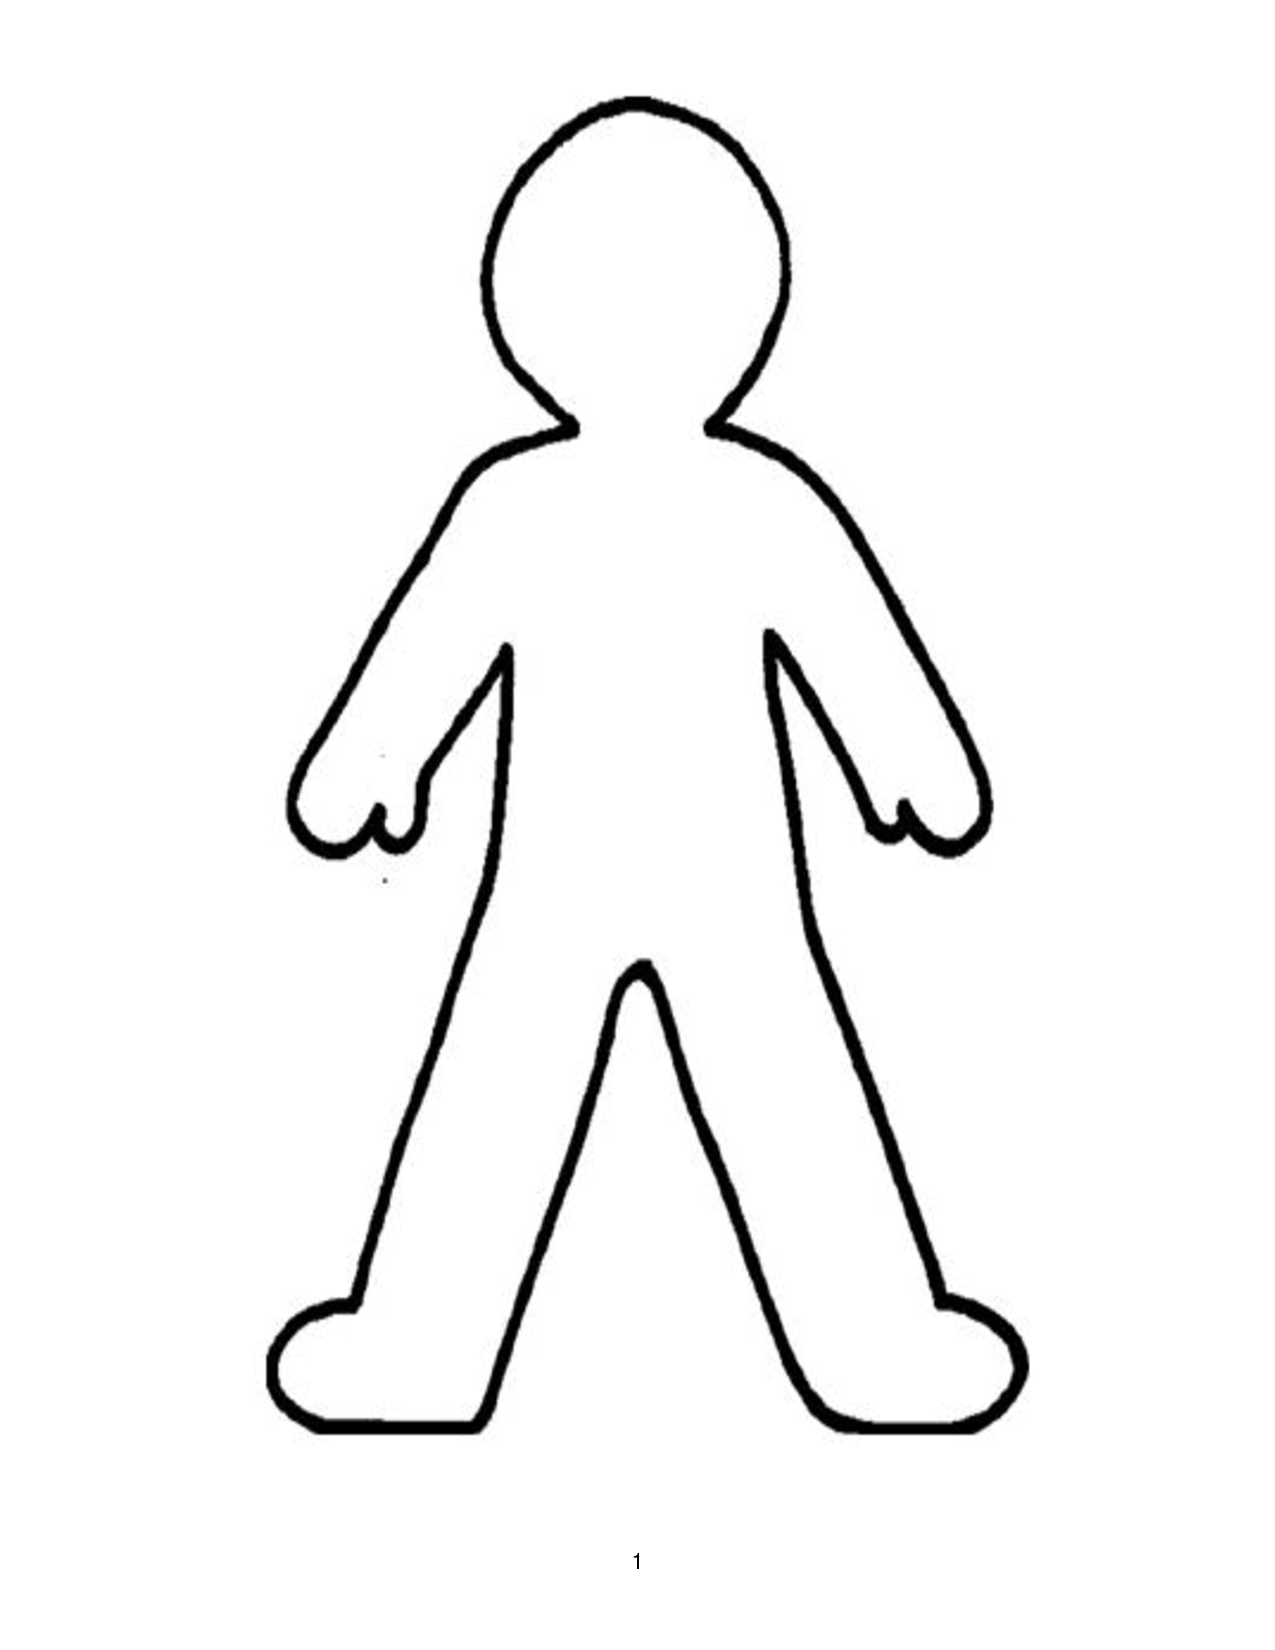 Blank Person Outline - Clipart library